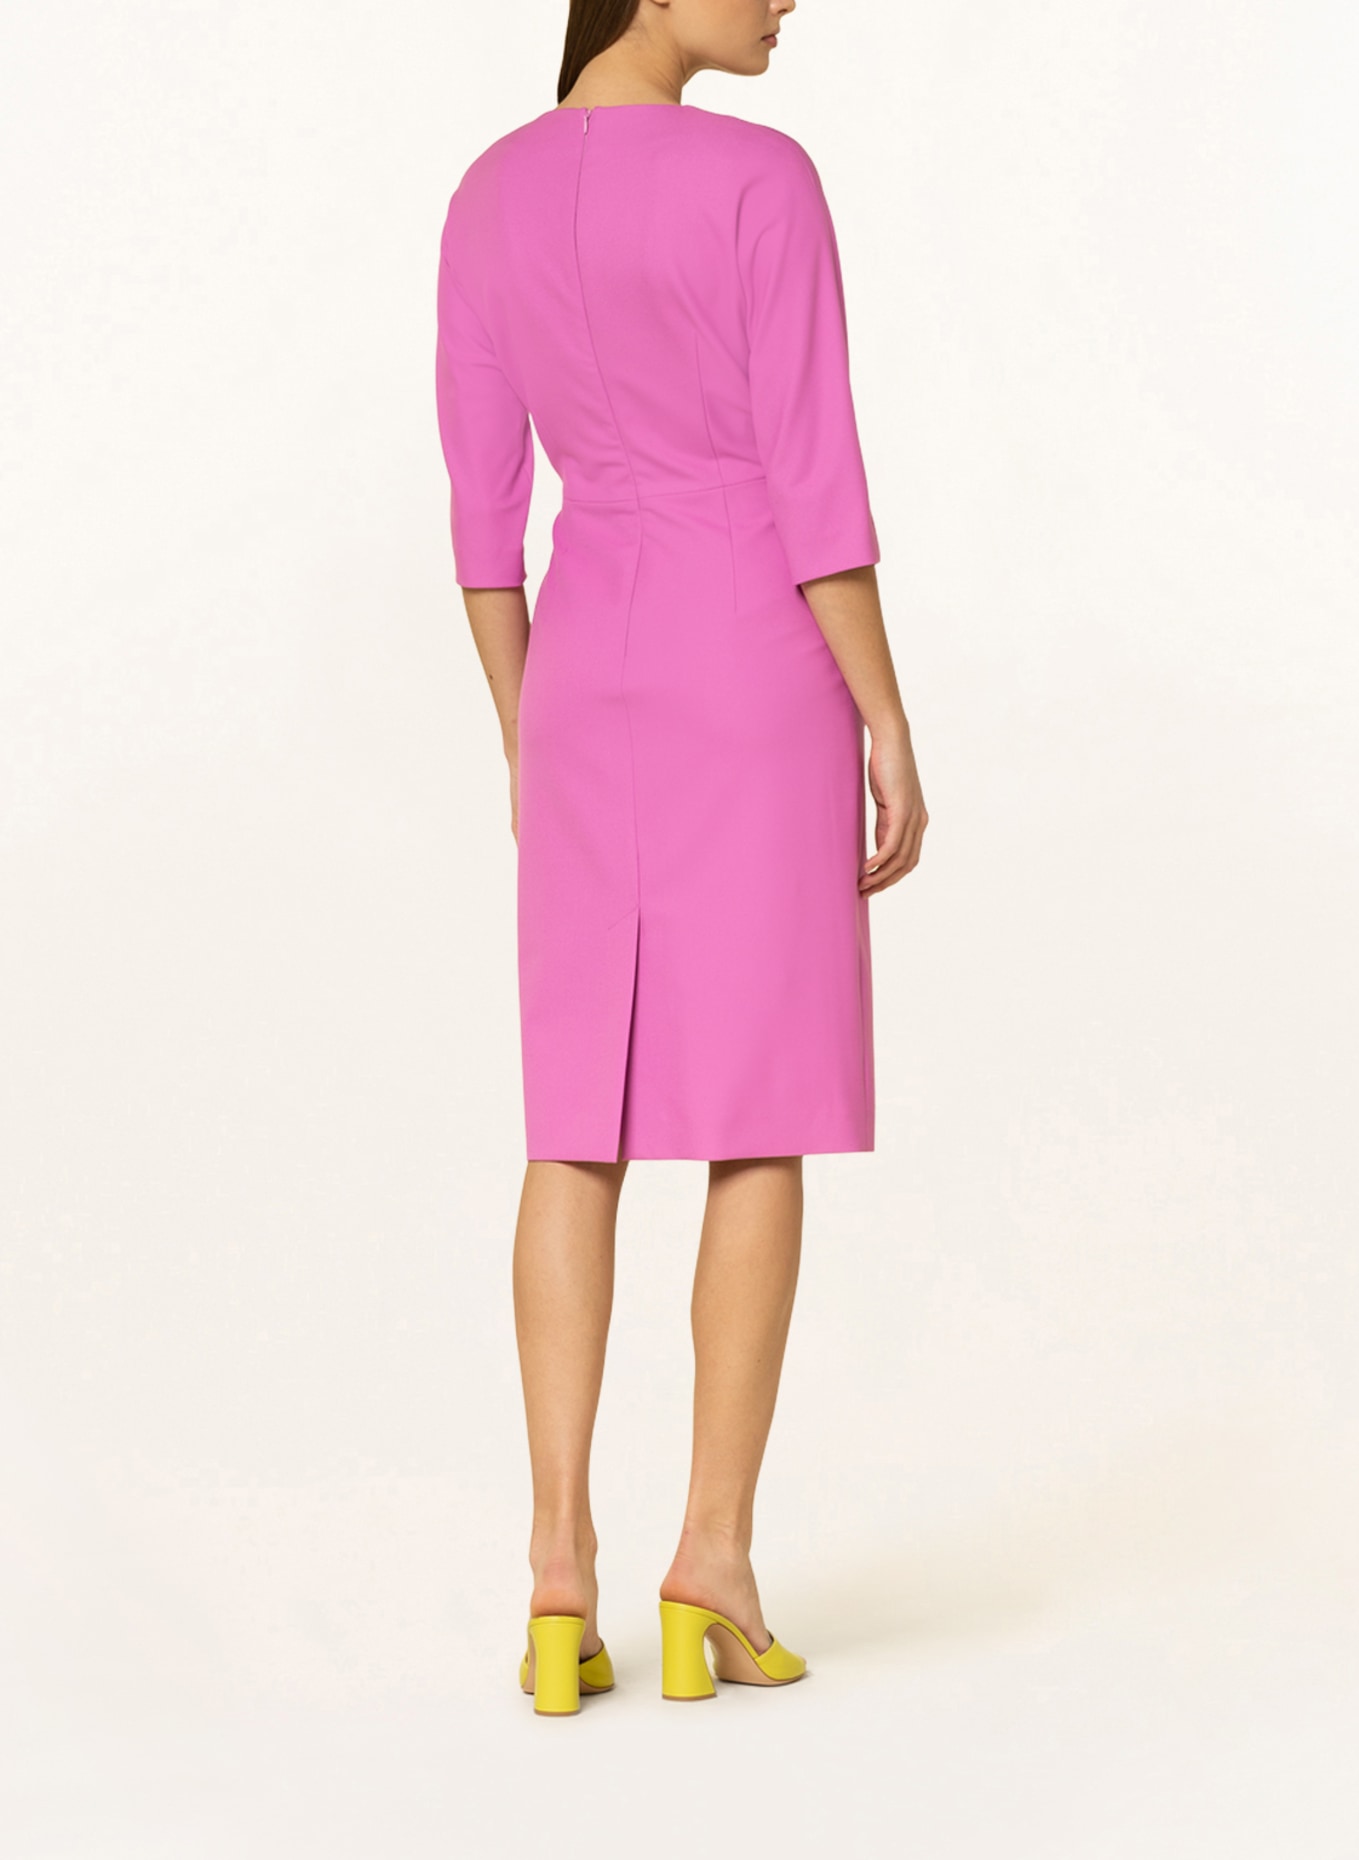 RIANI Sheath dress with 3/4 sleeves, Color: PINK (Image 3)